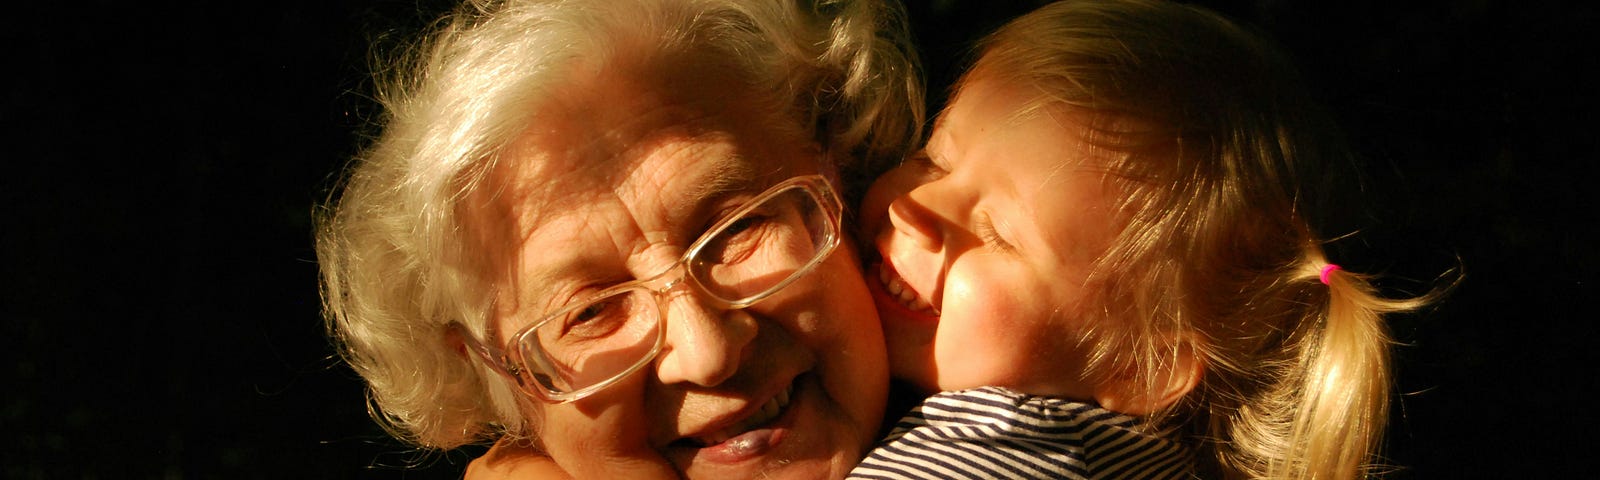 A little girl hugs a smiling old woman.